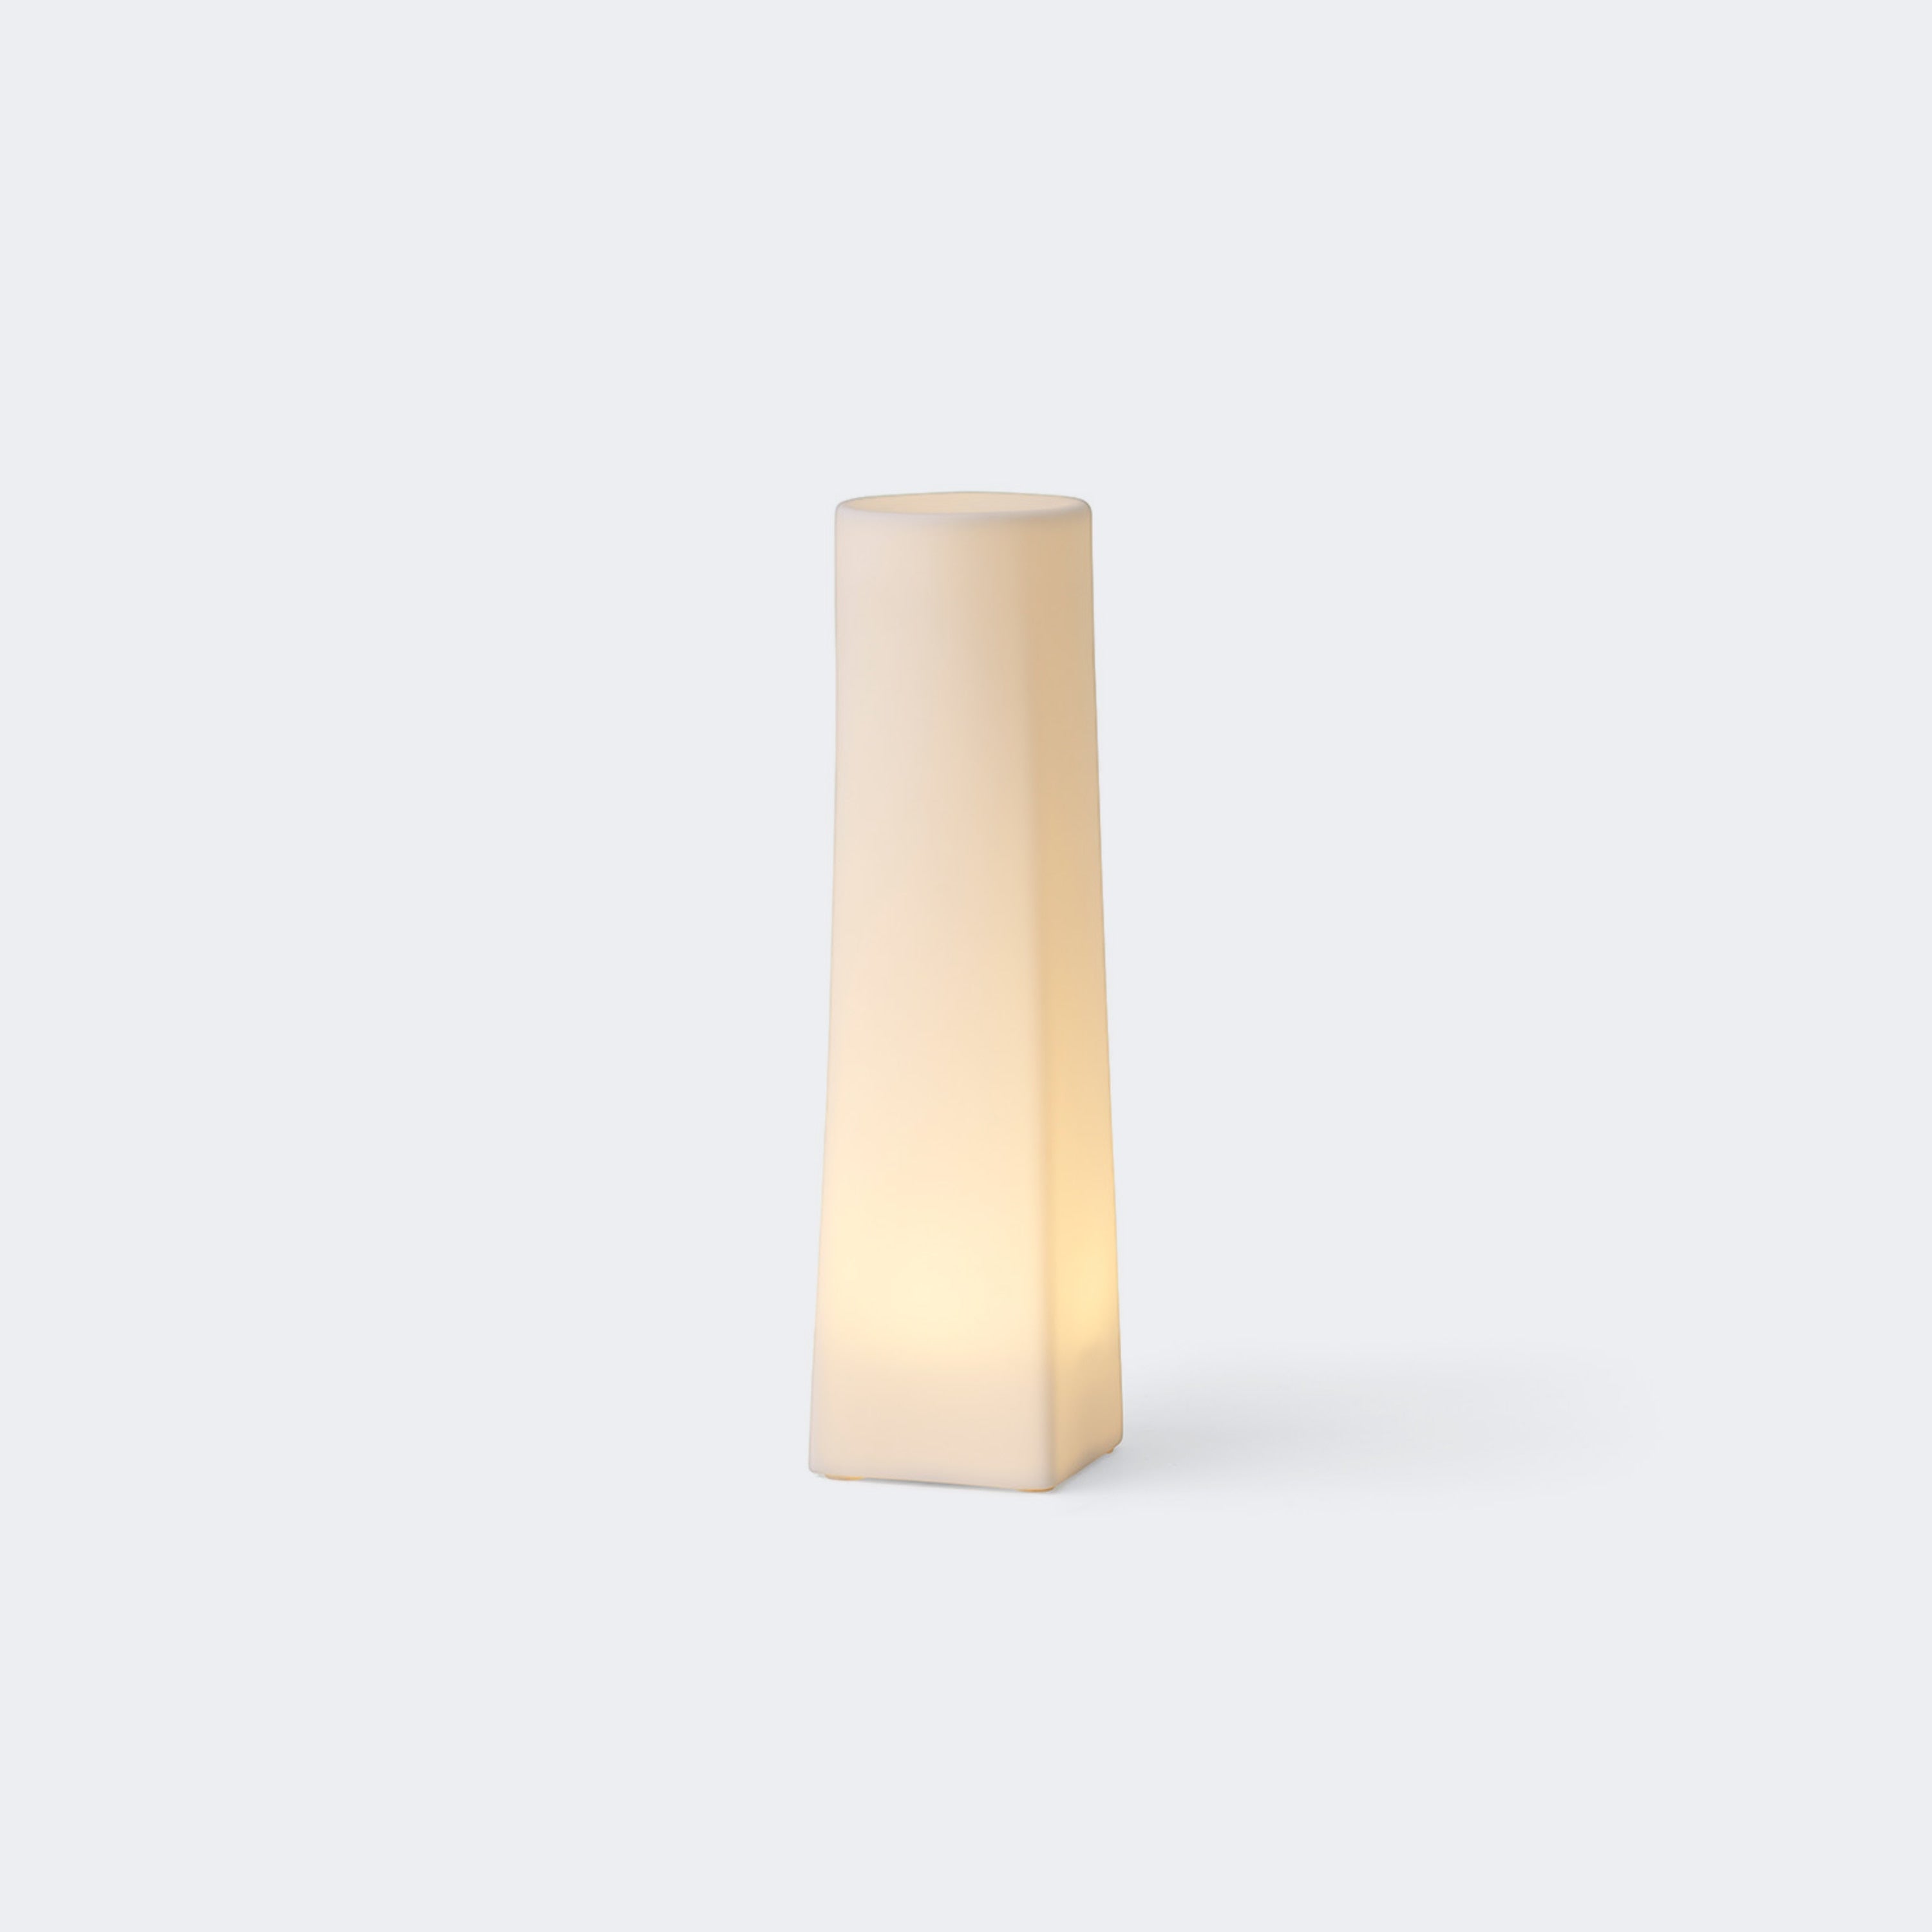 Audo Copenhagen Ignus Flameless Candle 9in - KANSO#Select Size_9in